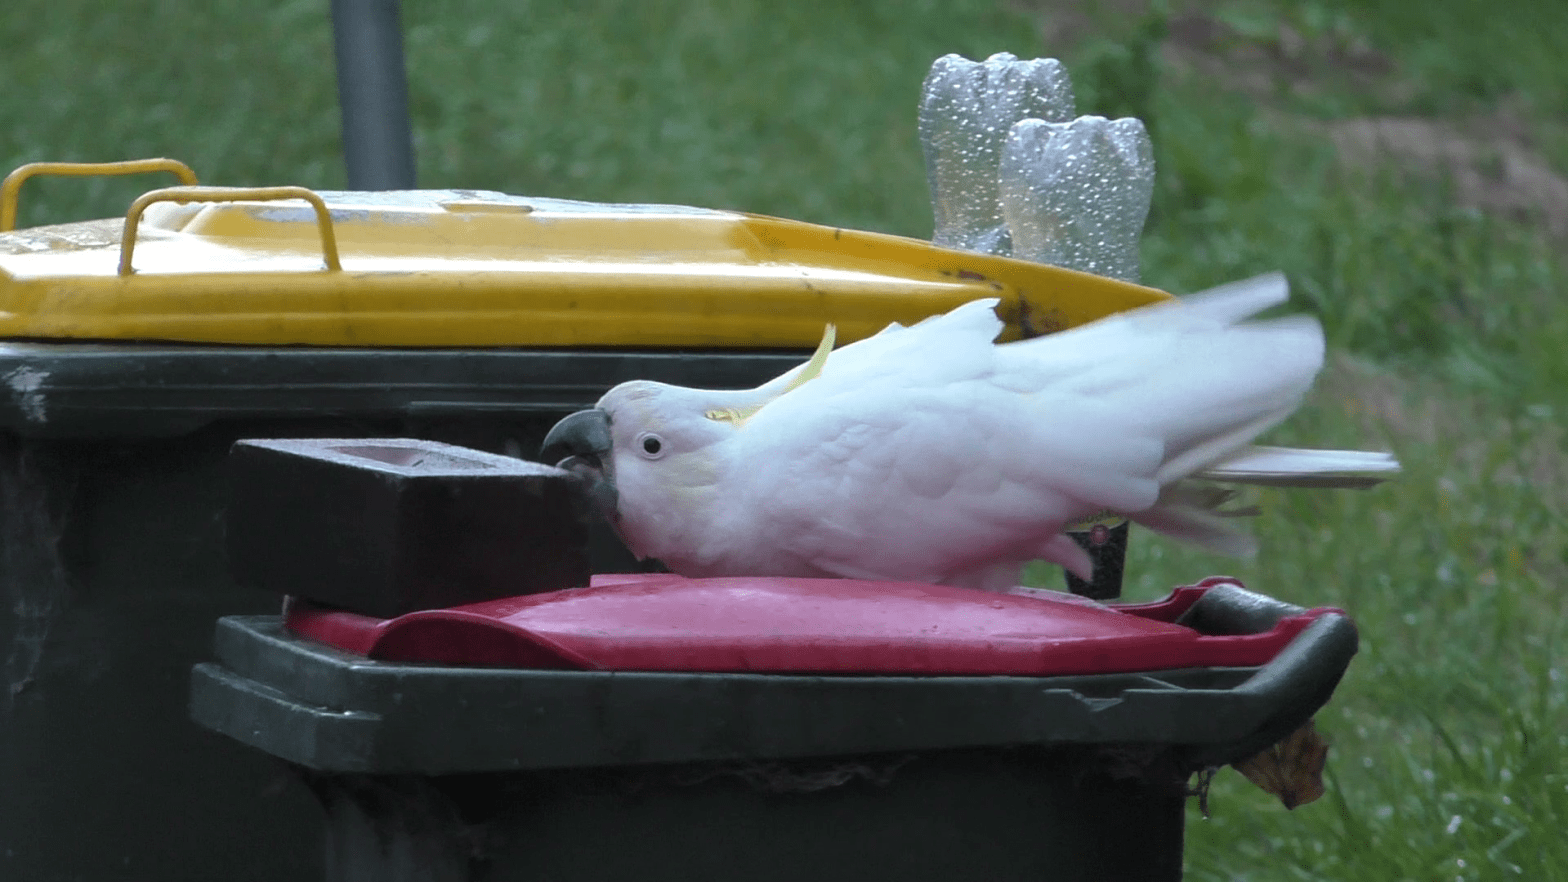 A cockatoo trying to push off the brick placed to keep it away from the trash it craves. (Photo: Barbara Klump)